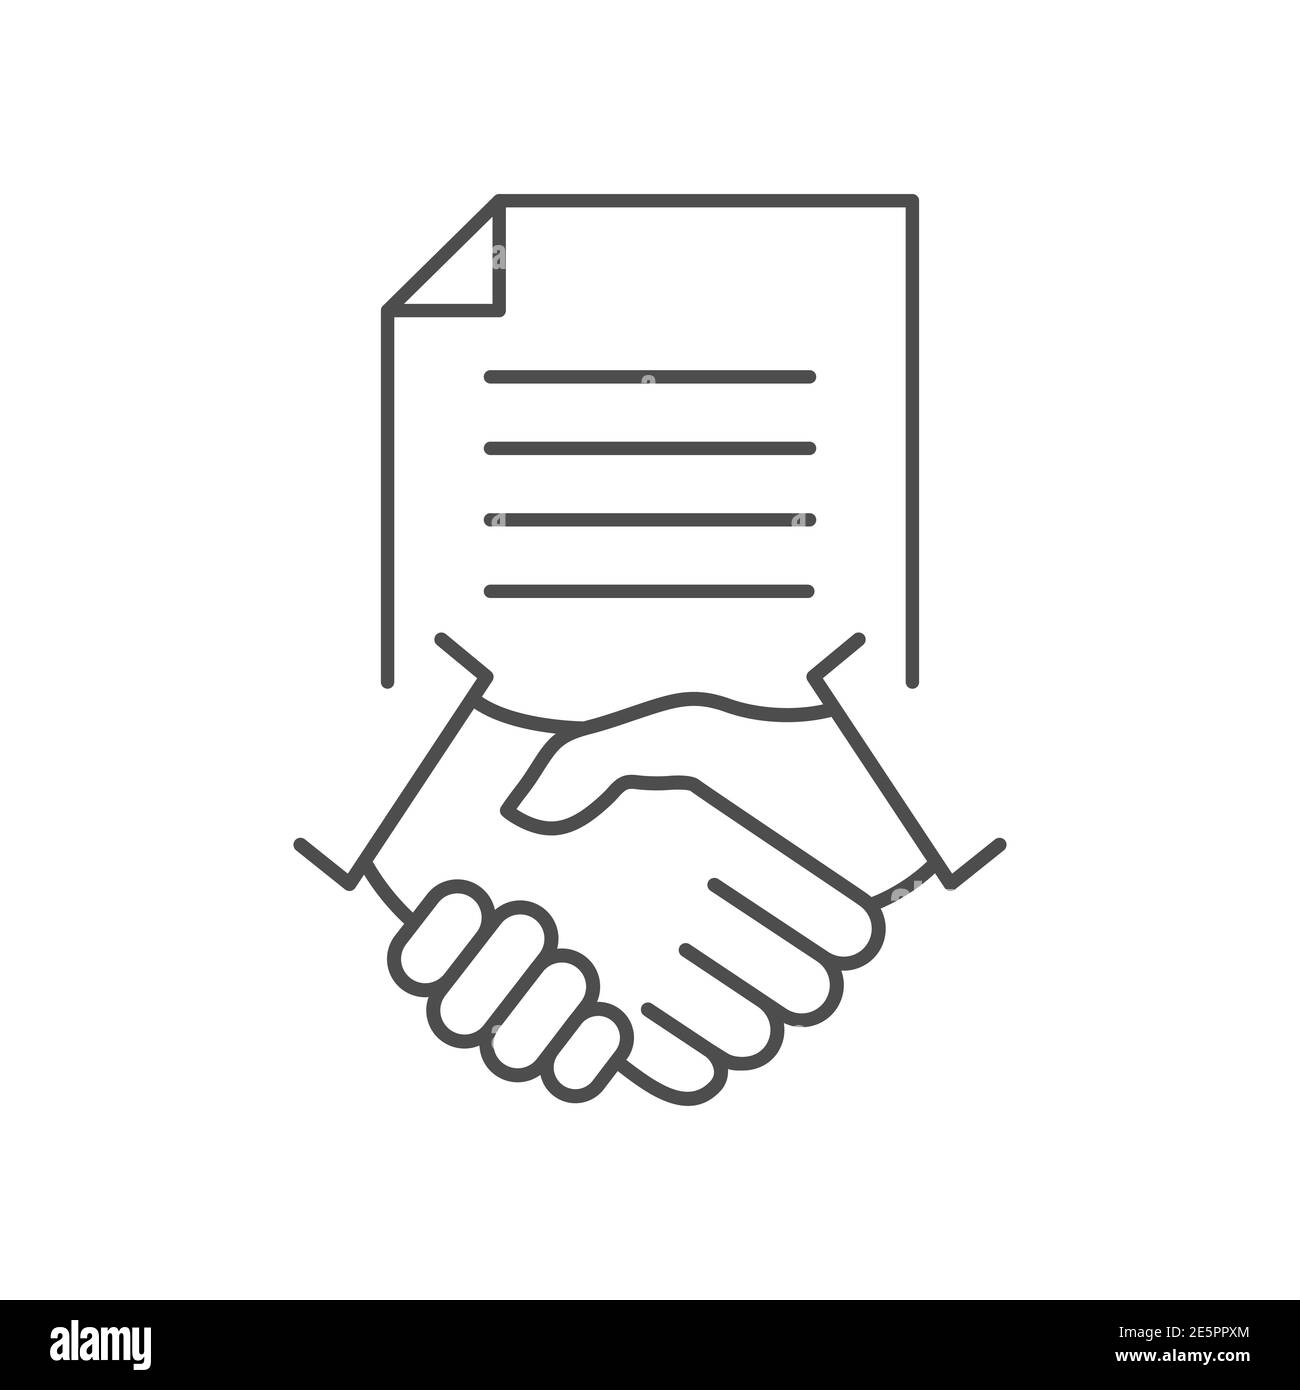 Contract line icon. Business handshake teamwork linear concept. Agreement signing symbol. Vector isolated on white. Stock Vector